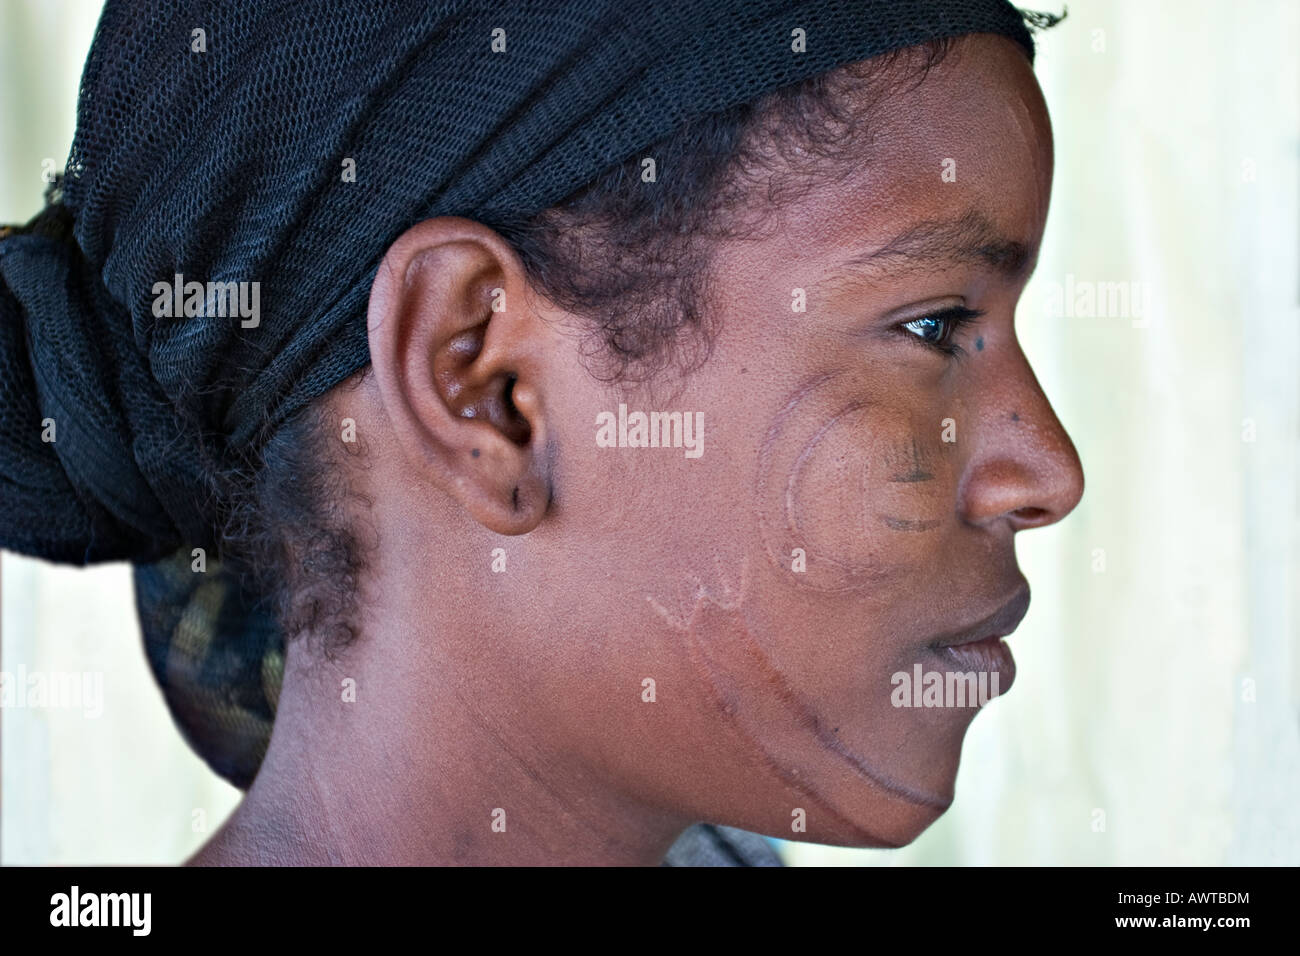 Profile of Afar girl with face beauty scars, Djibouti, Africa Stock Photo